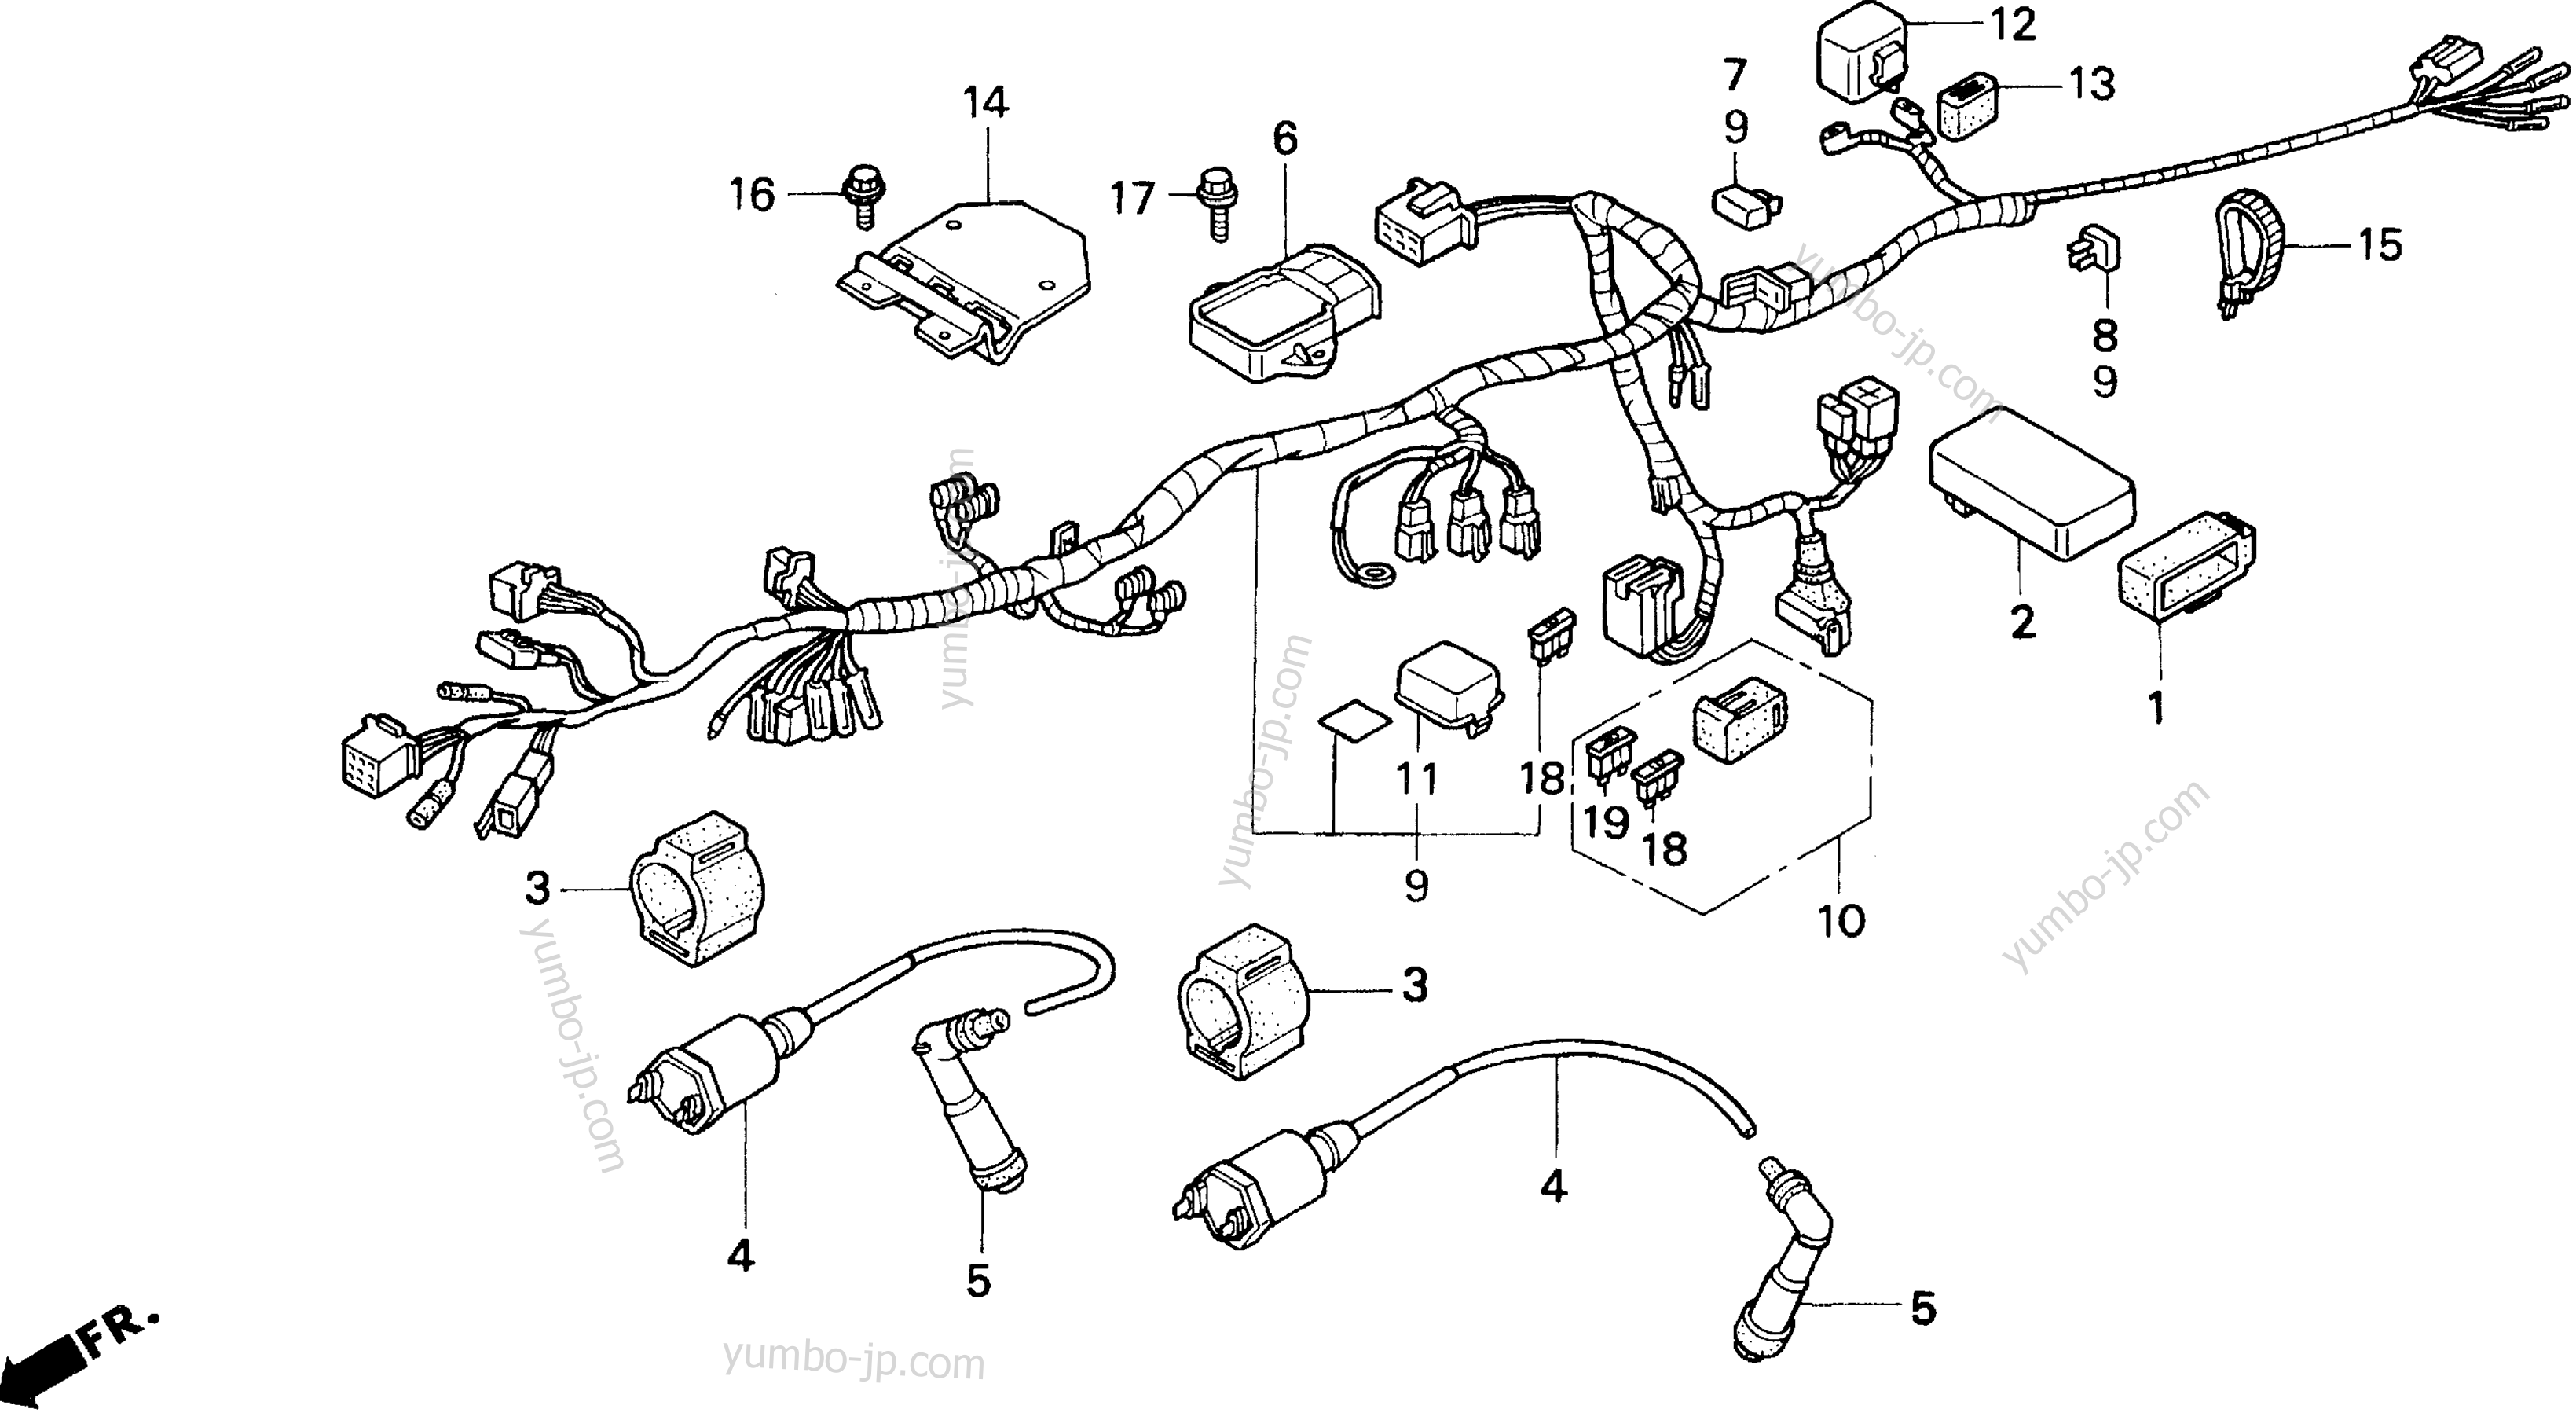 WIRE HARNESS for motorcycles HONDA CB250 A 1993 year